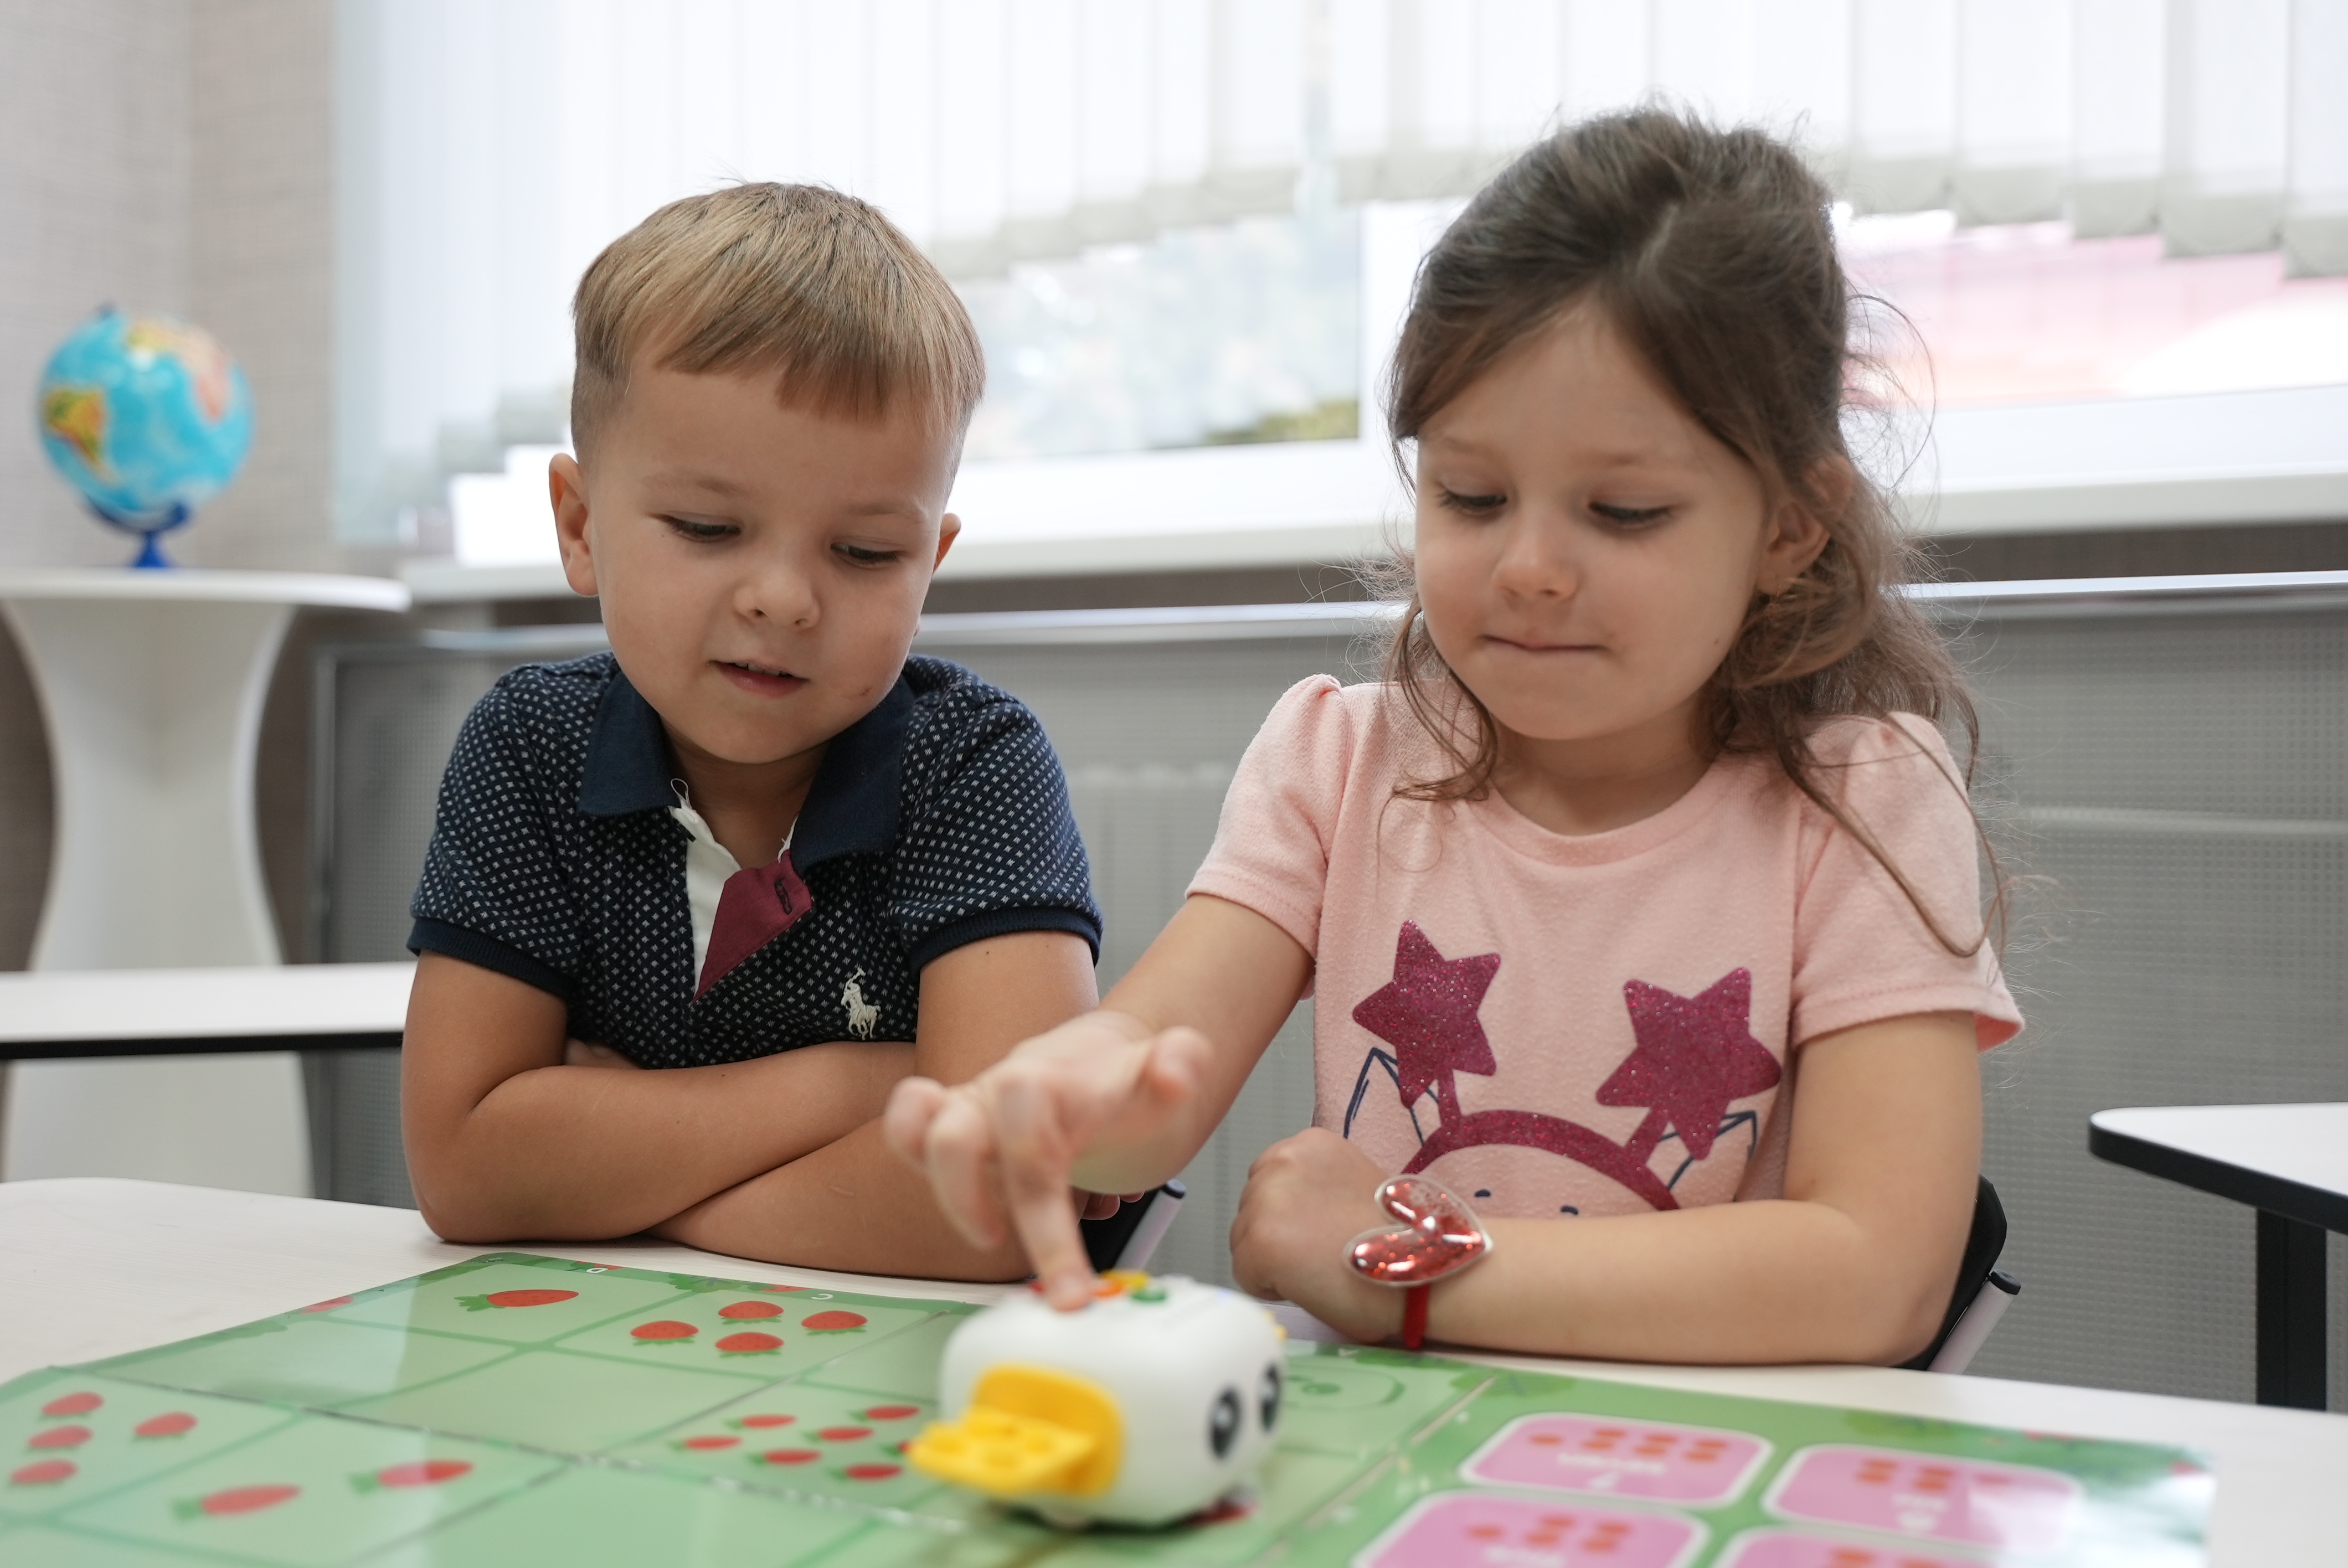 The new Tale-Bot Pro creates an intelligent learning partner for children